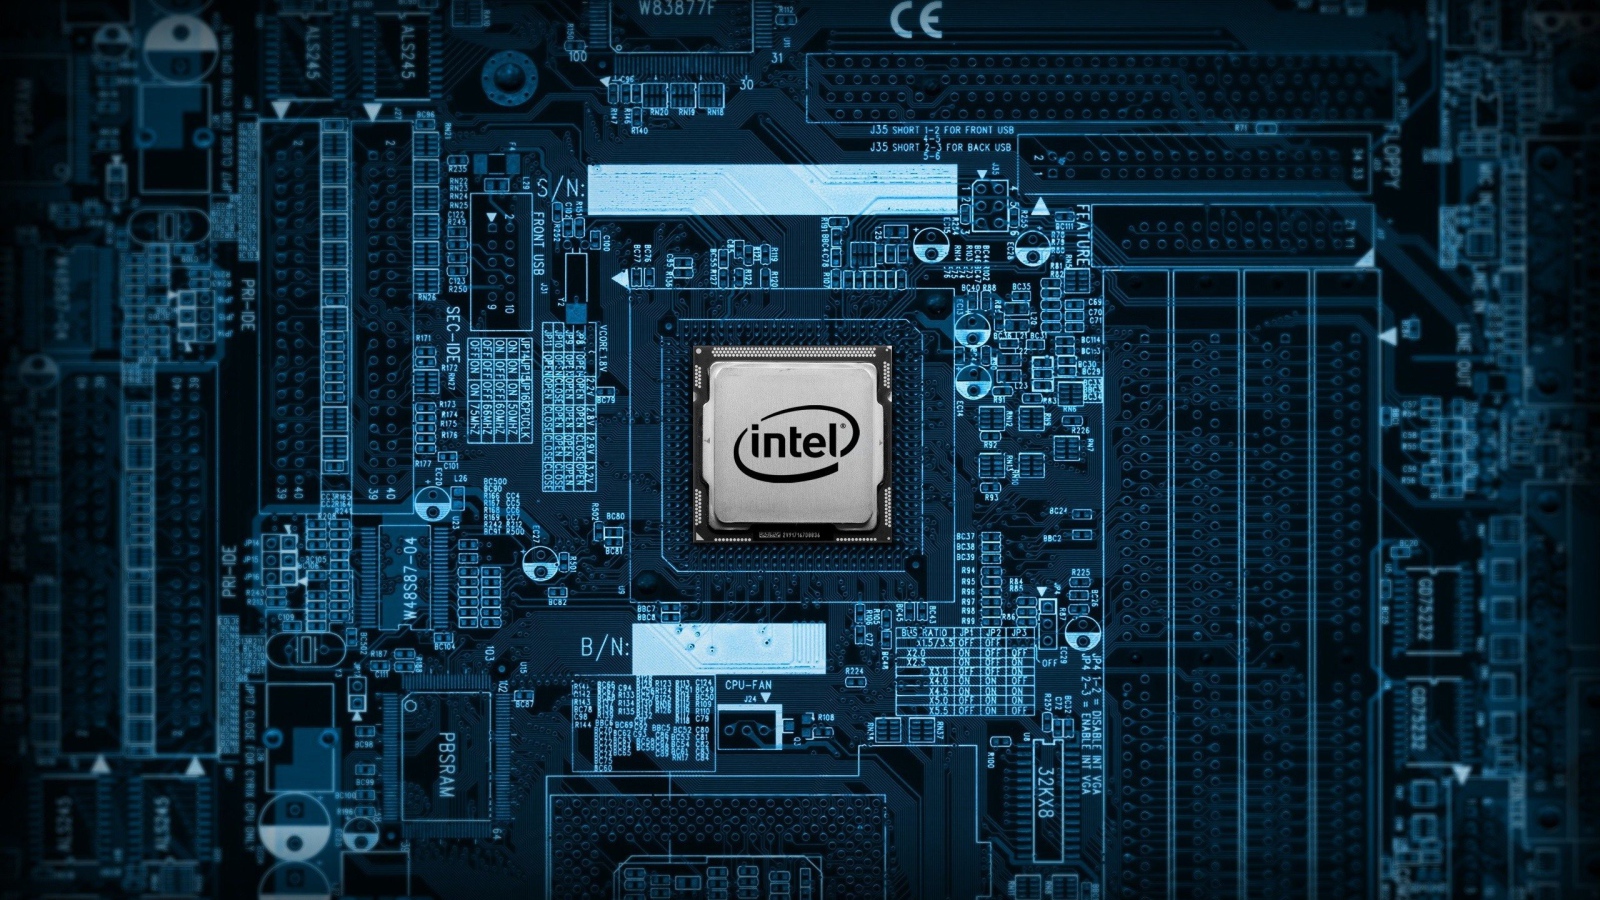 Intel chip on the motherboard